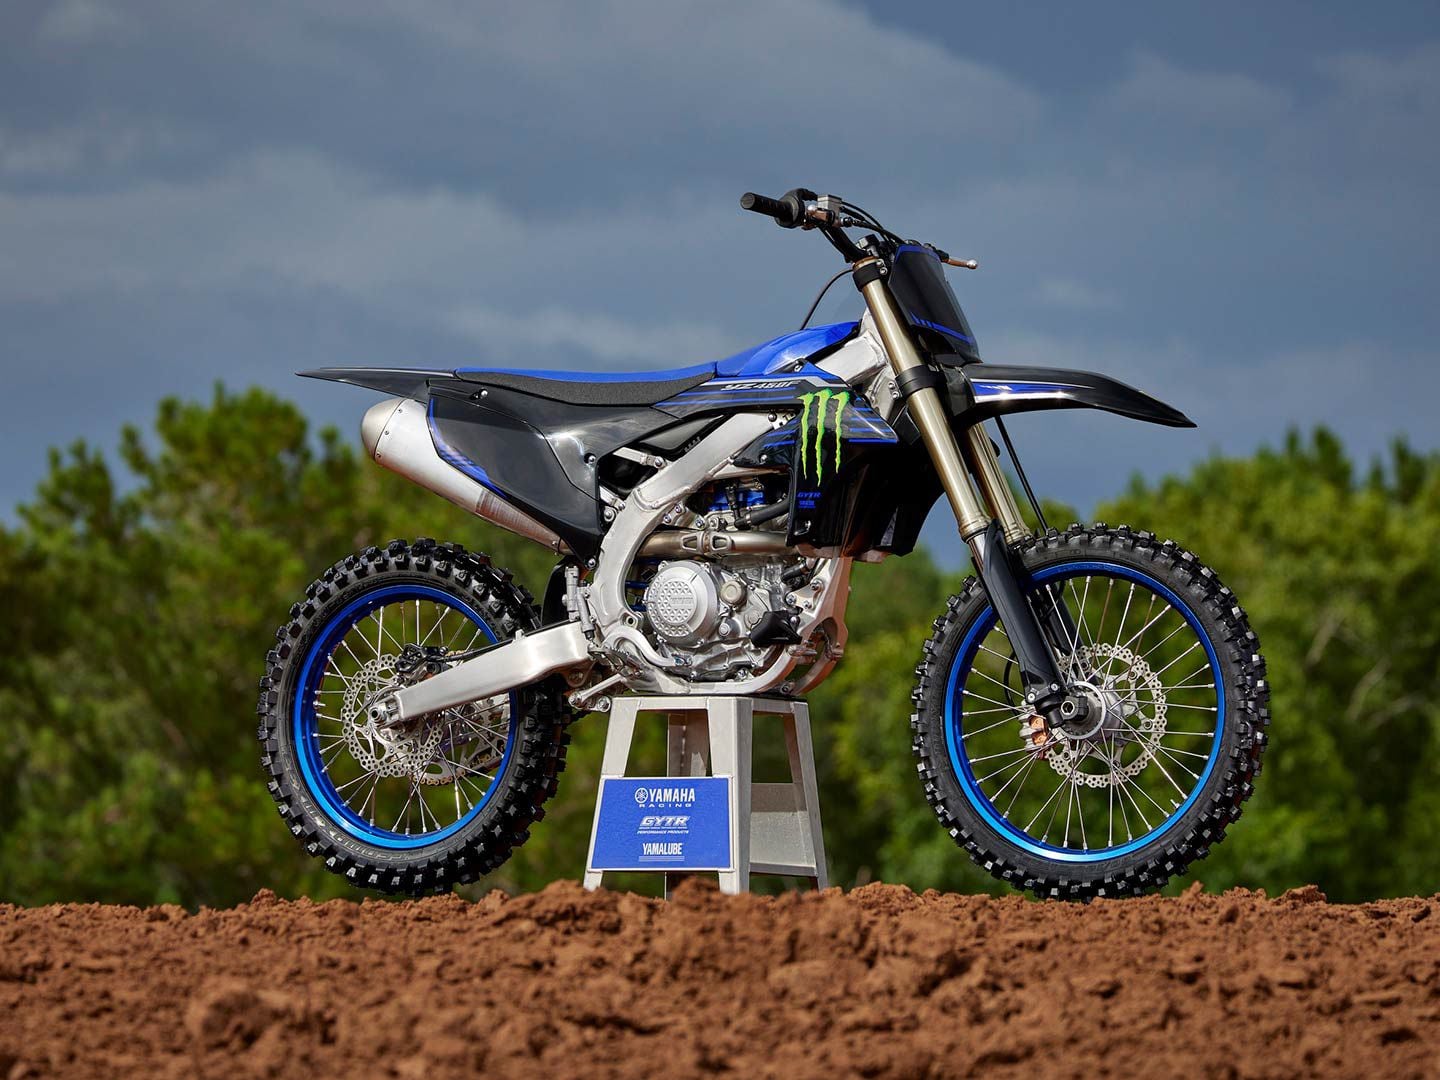 Since the YZ450F is the winner of <i>Dirt Rider</i>’s 2023 450 shootout it’s proven that it is a top contender in the category.